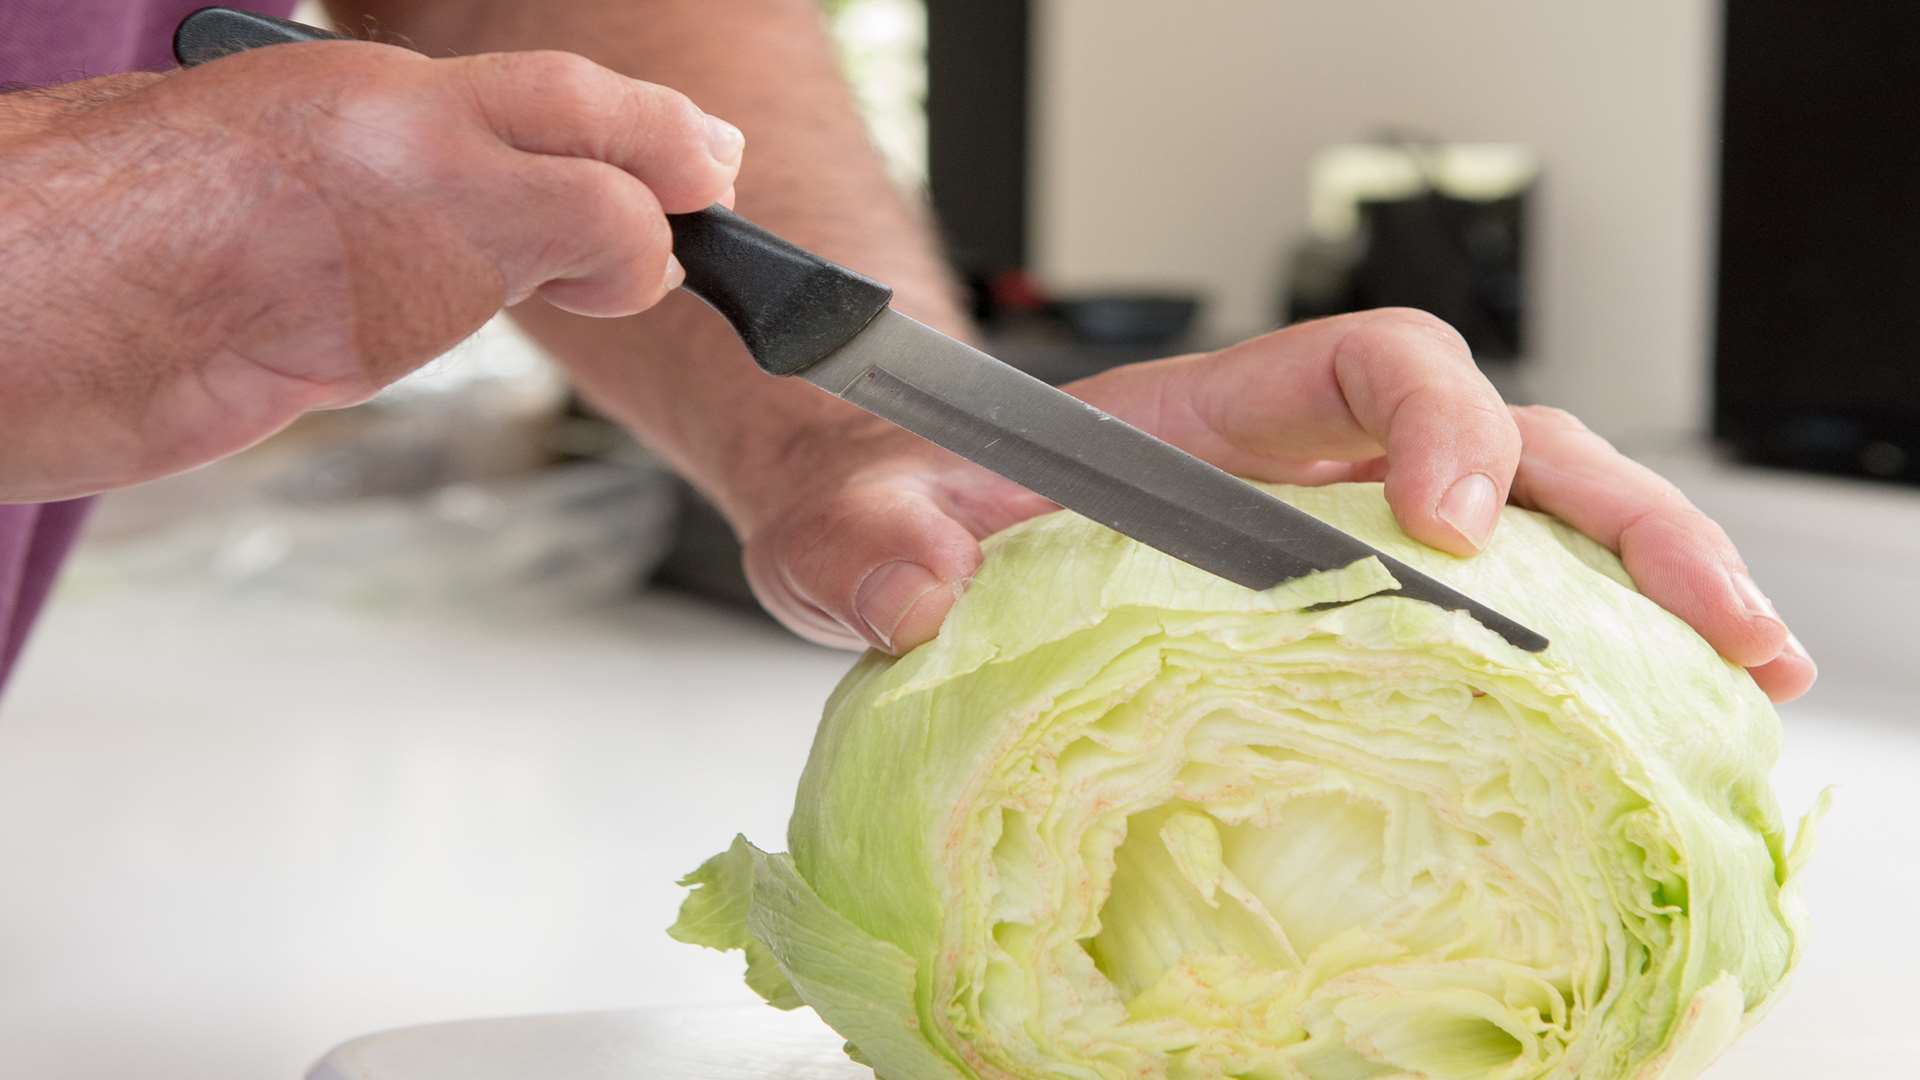 Jeremy can now cut up a lettuce. Picture: SWNS